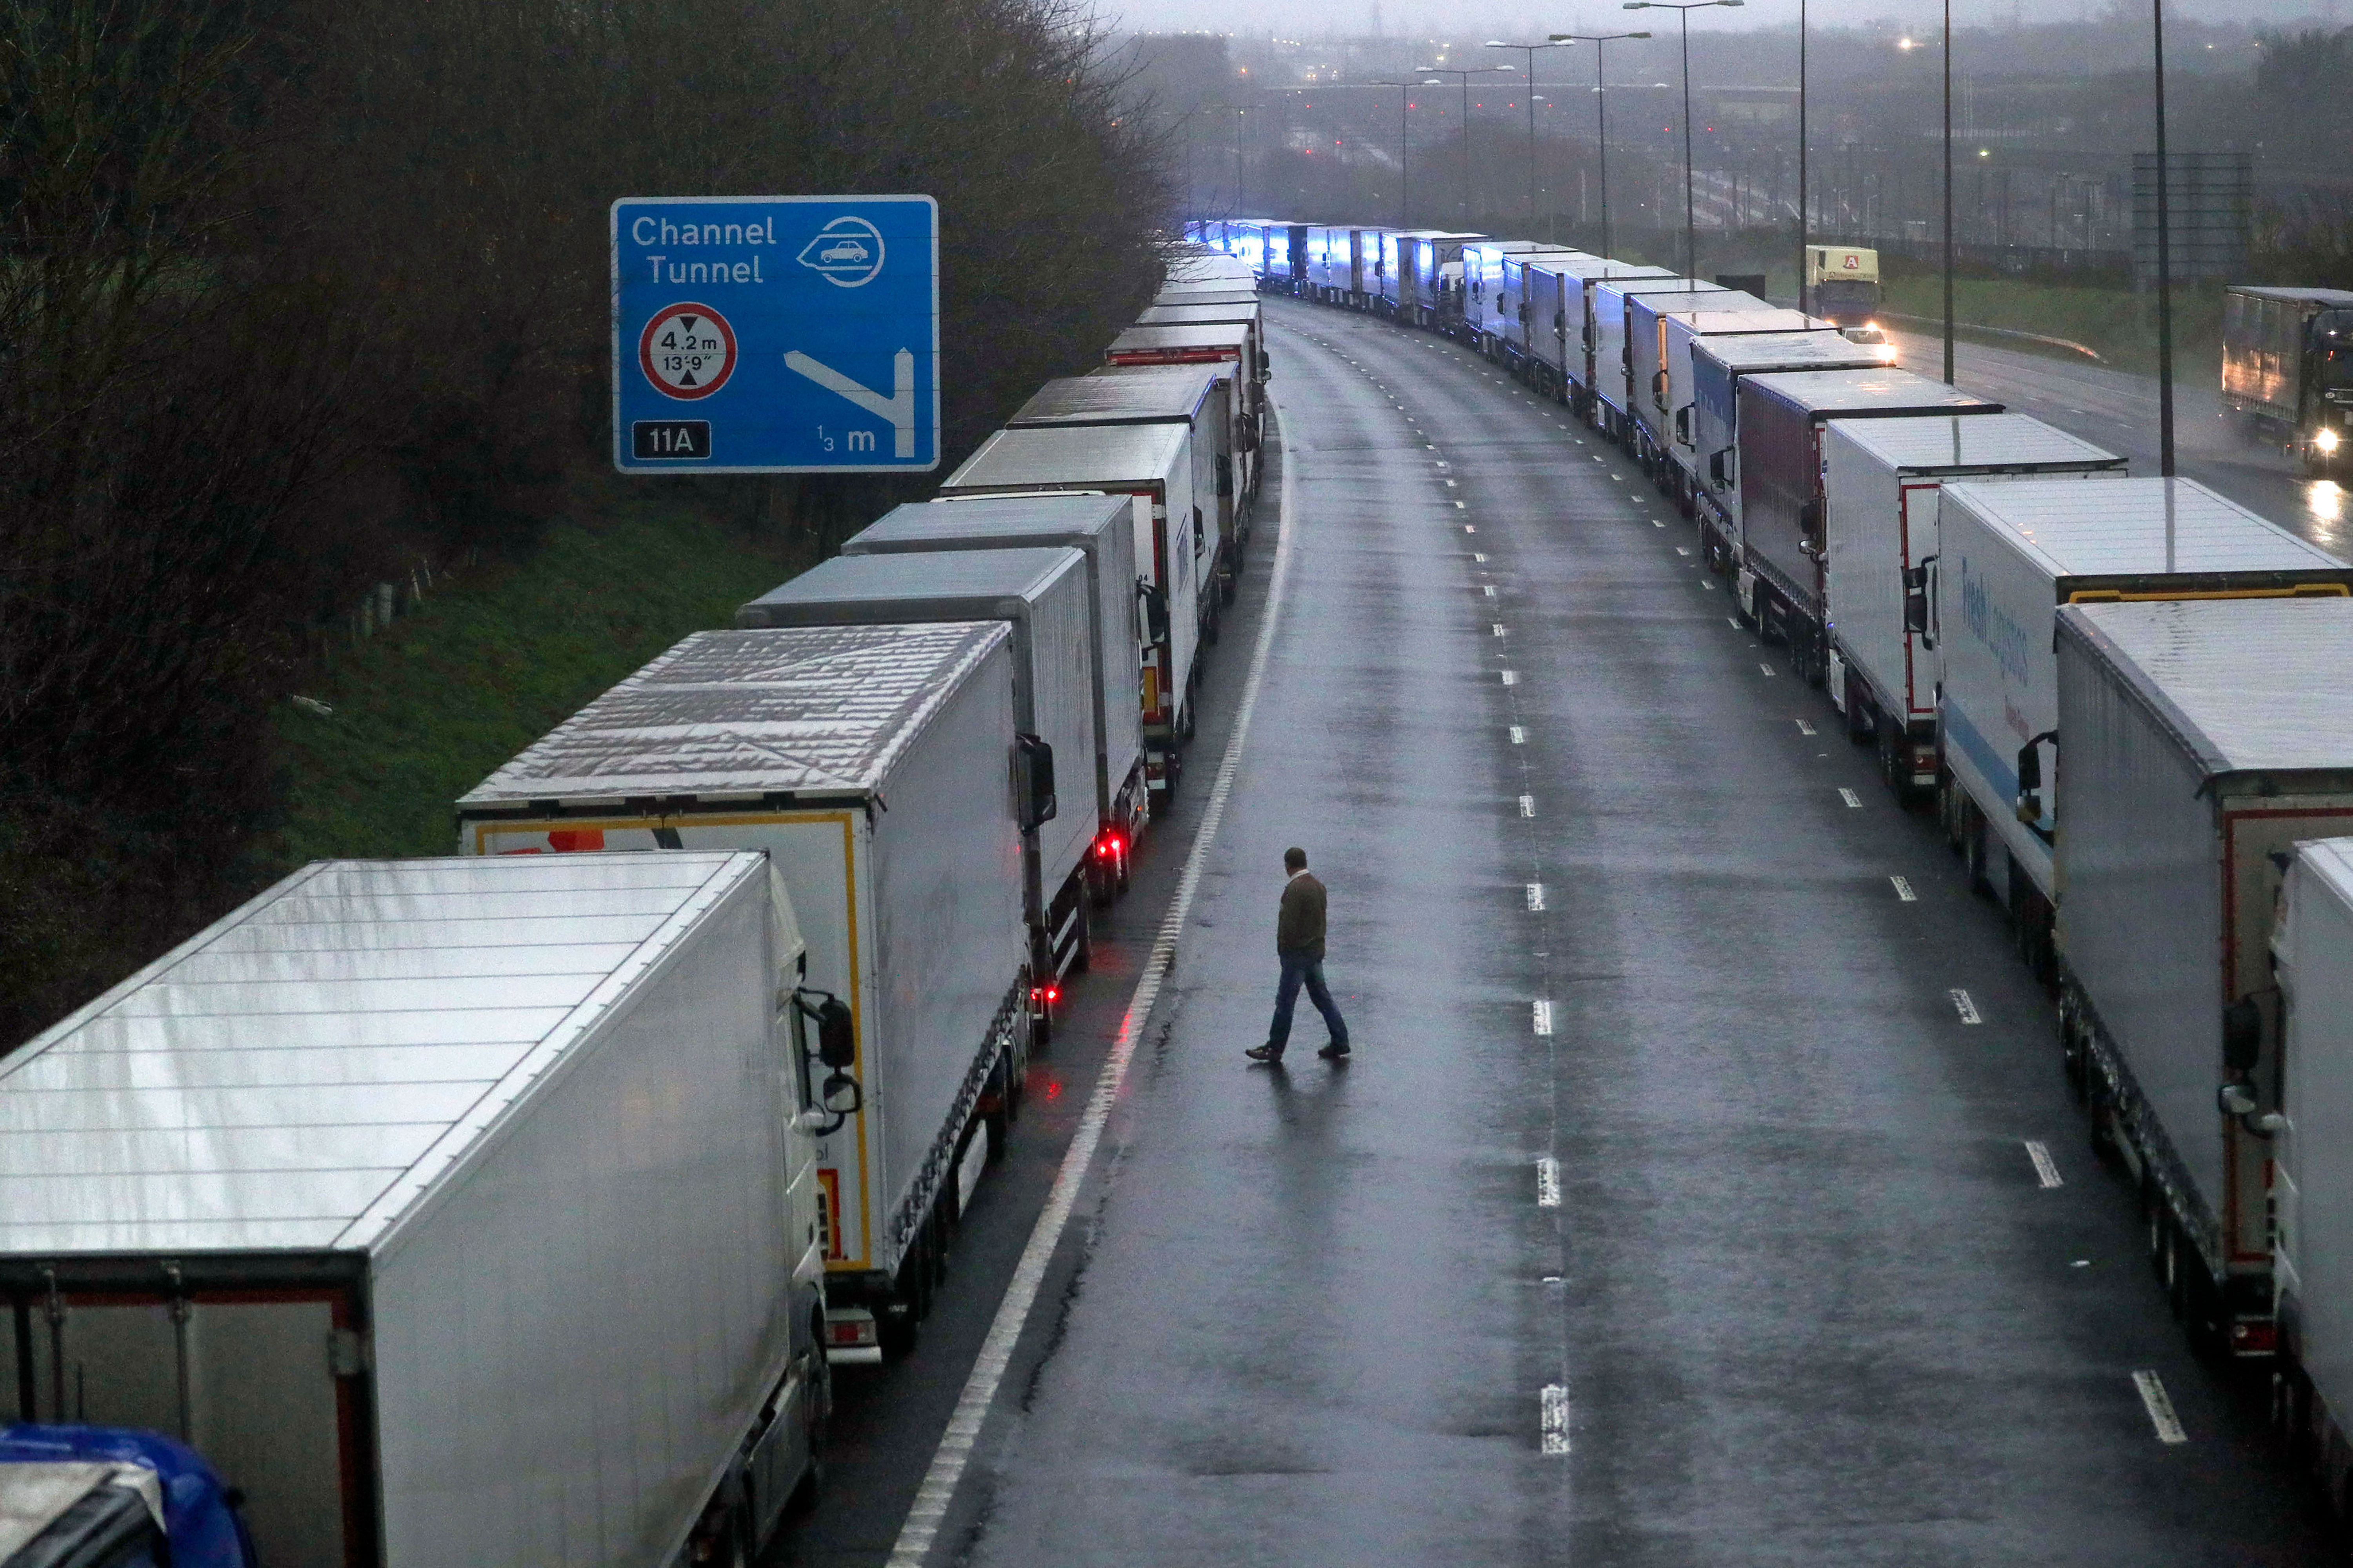 Lorries are parked on the M20 near Folkestone in Kent, England, on December 21, after the Port of Dover and Eurotunnel were closed.